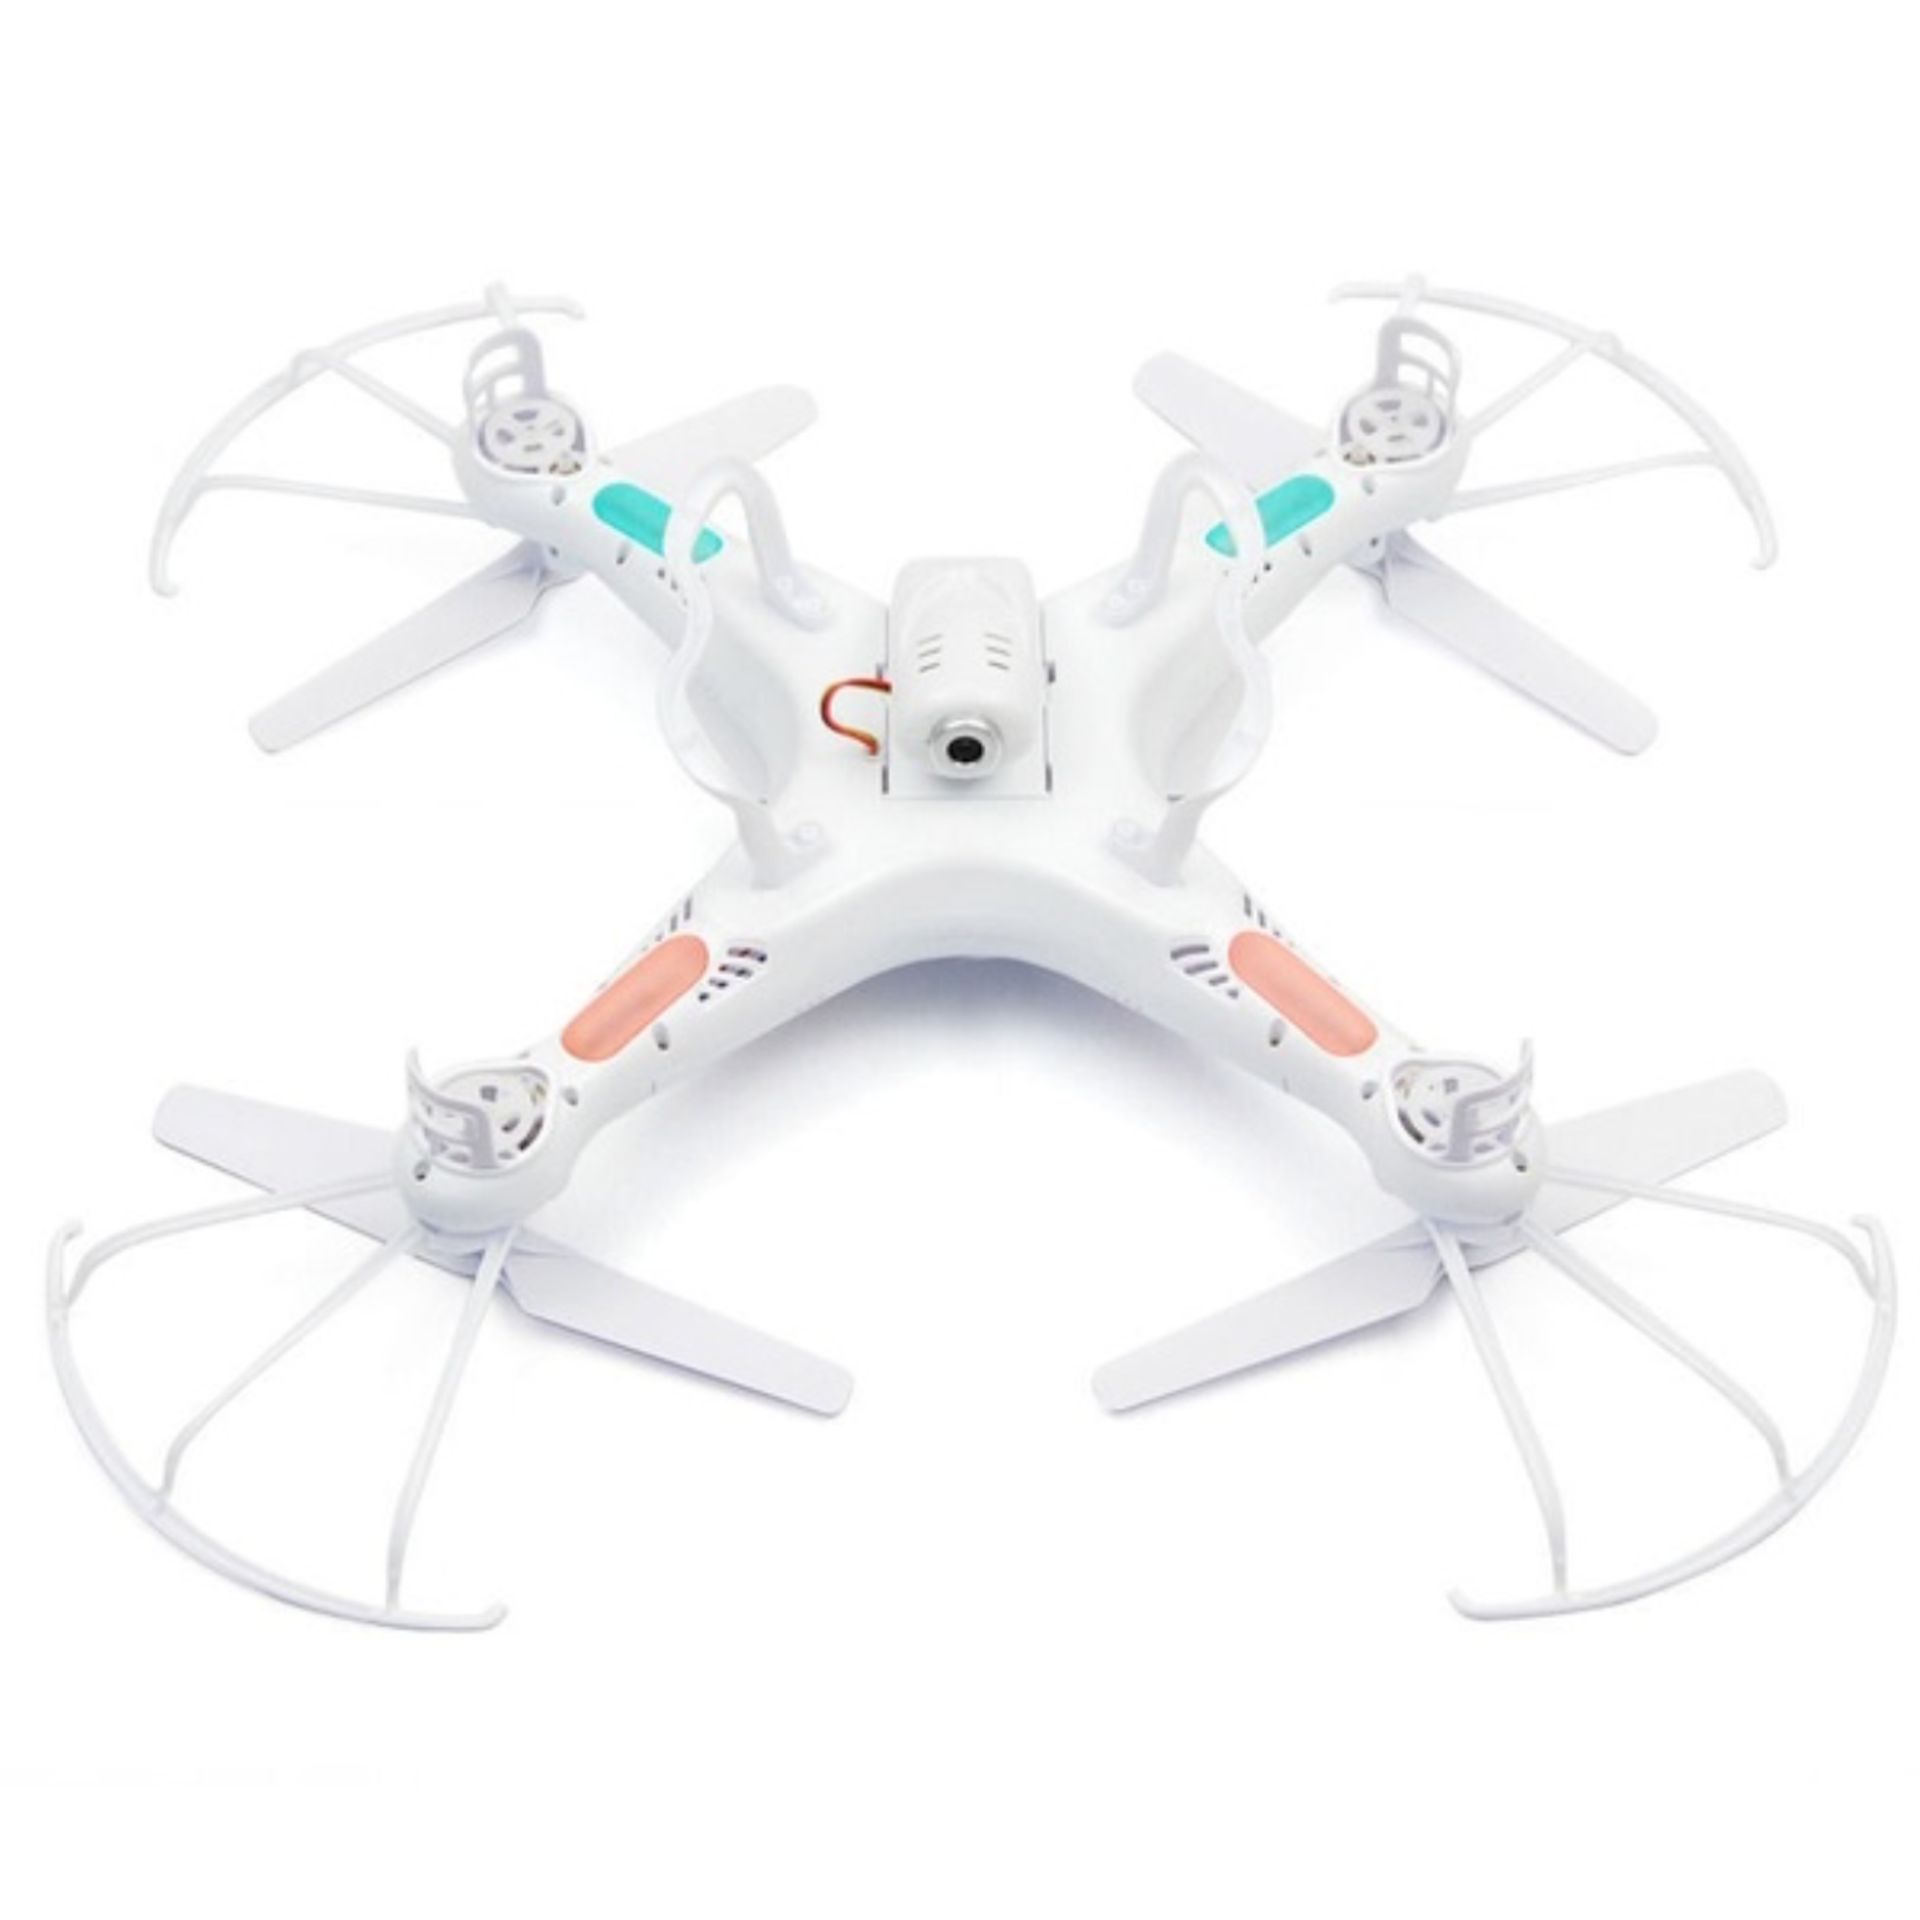 BRAND NEW IN BOX EXPLORERS QUADCOPTER WITH HD CAMERA *NO VAT* - Image 2 of 6